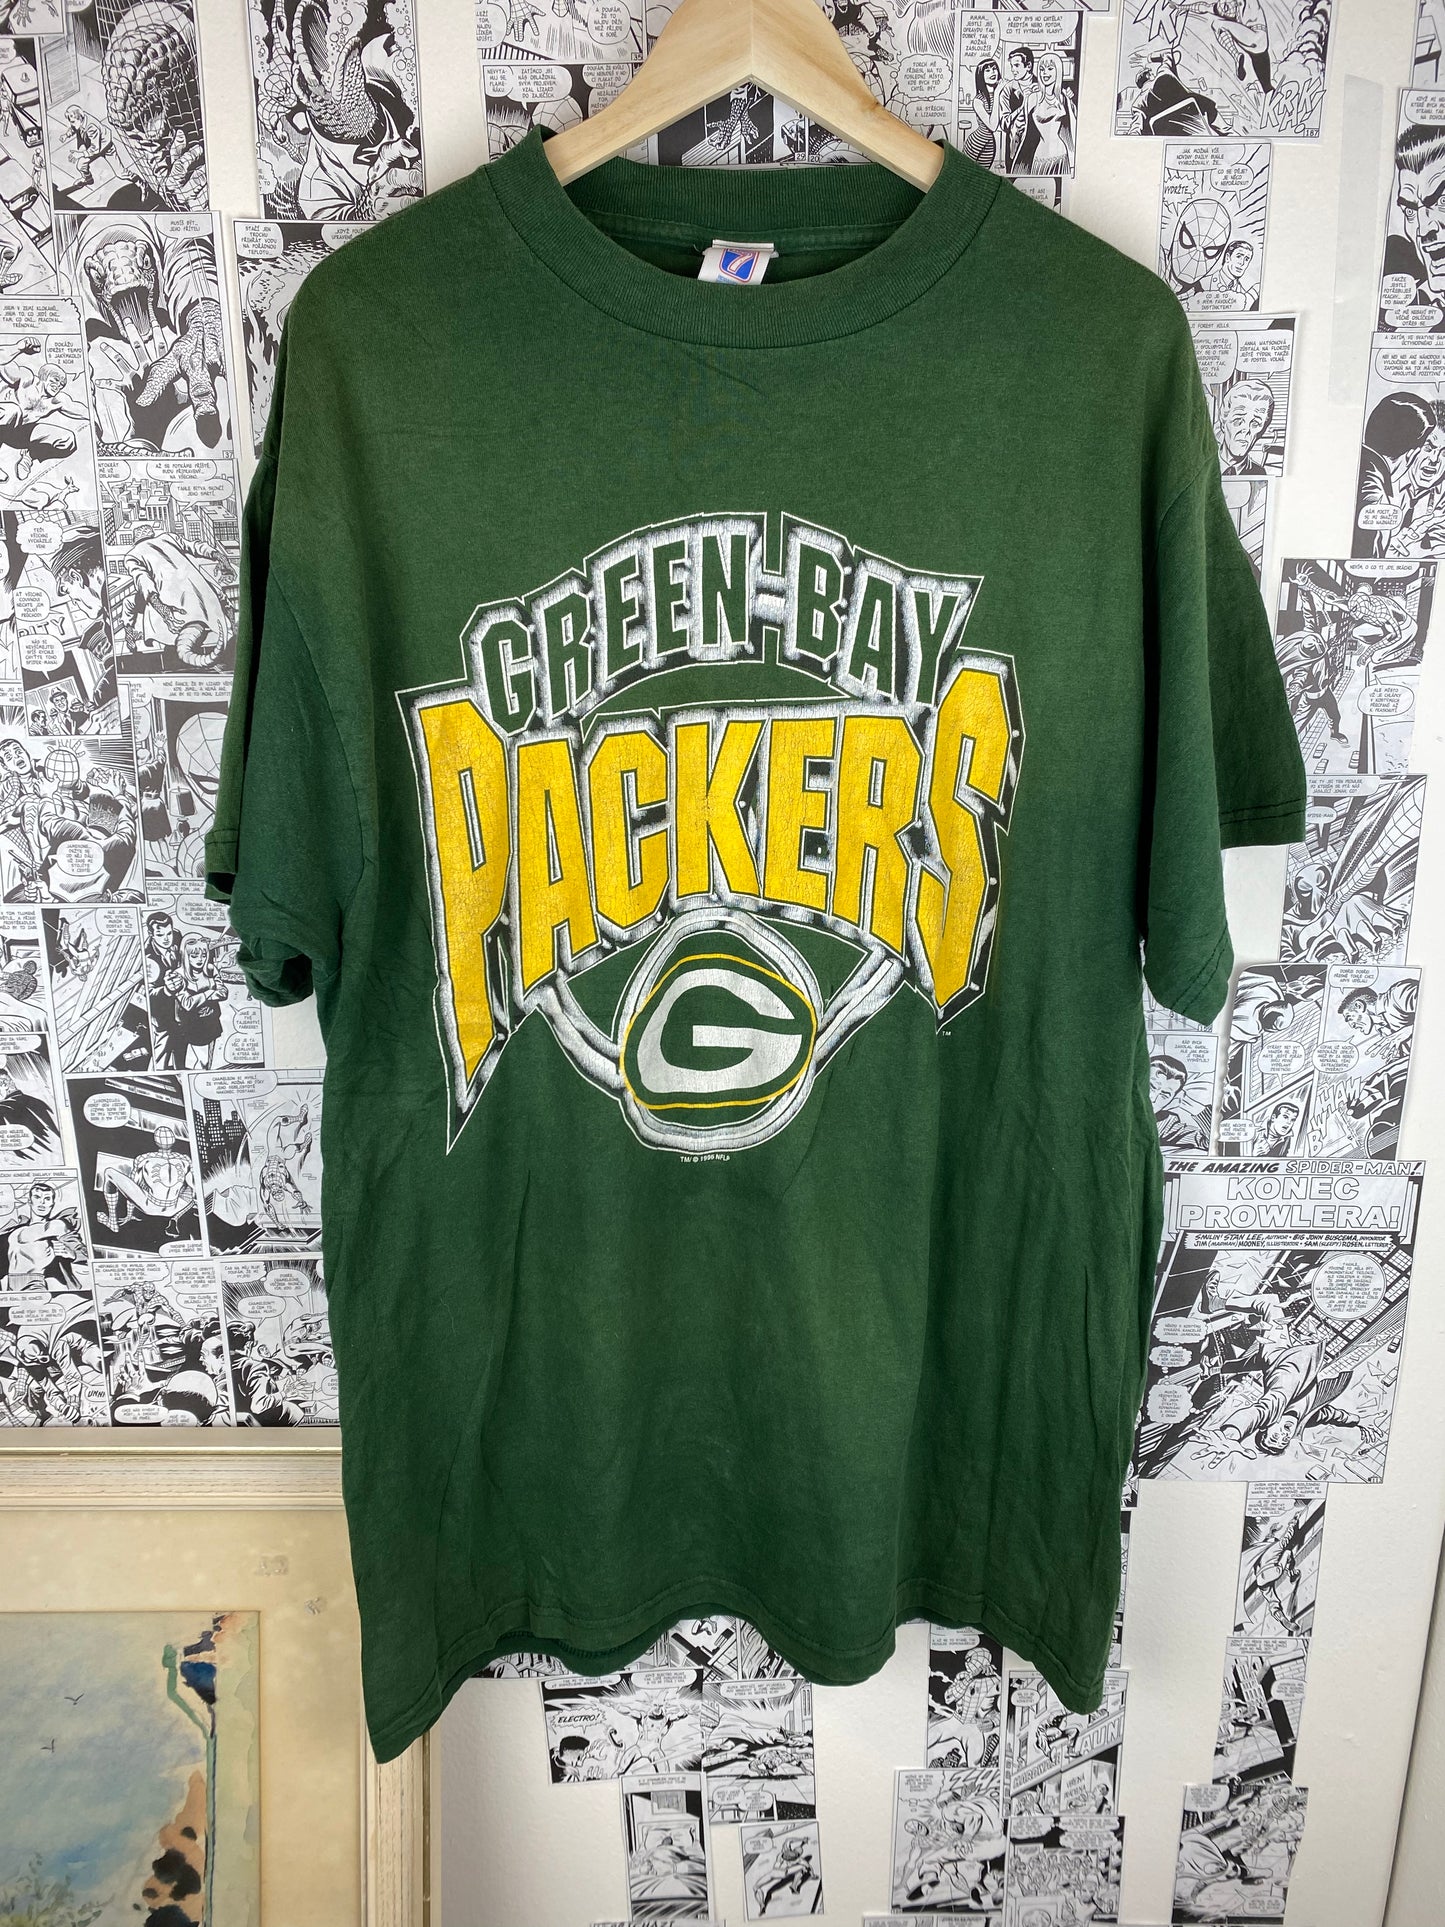 Vintage Green Bay Packers - 1995 t-shirt - size XL